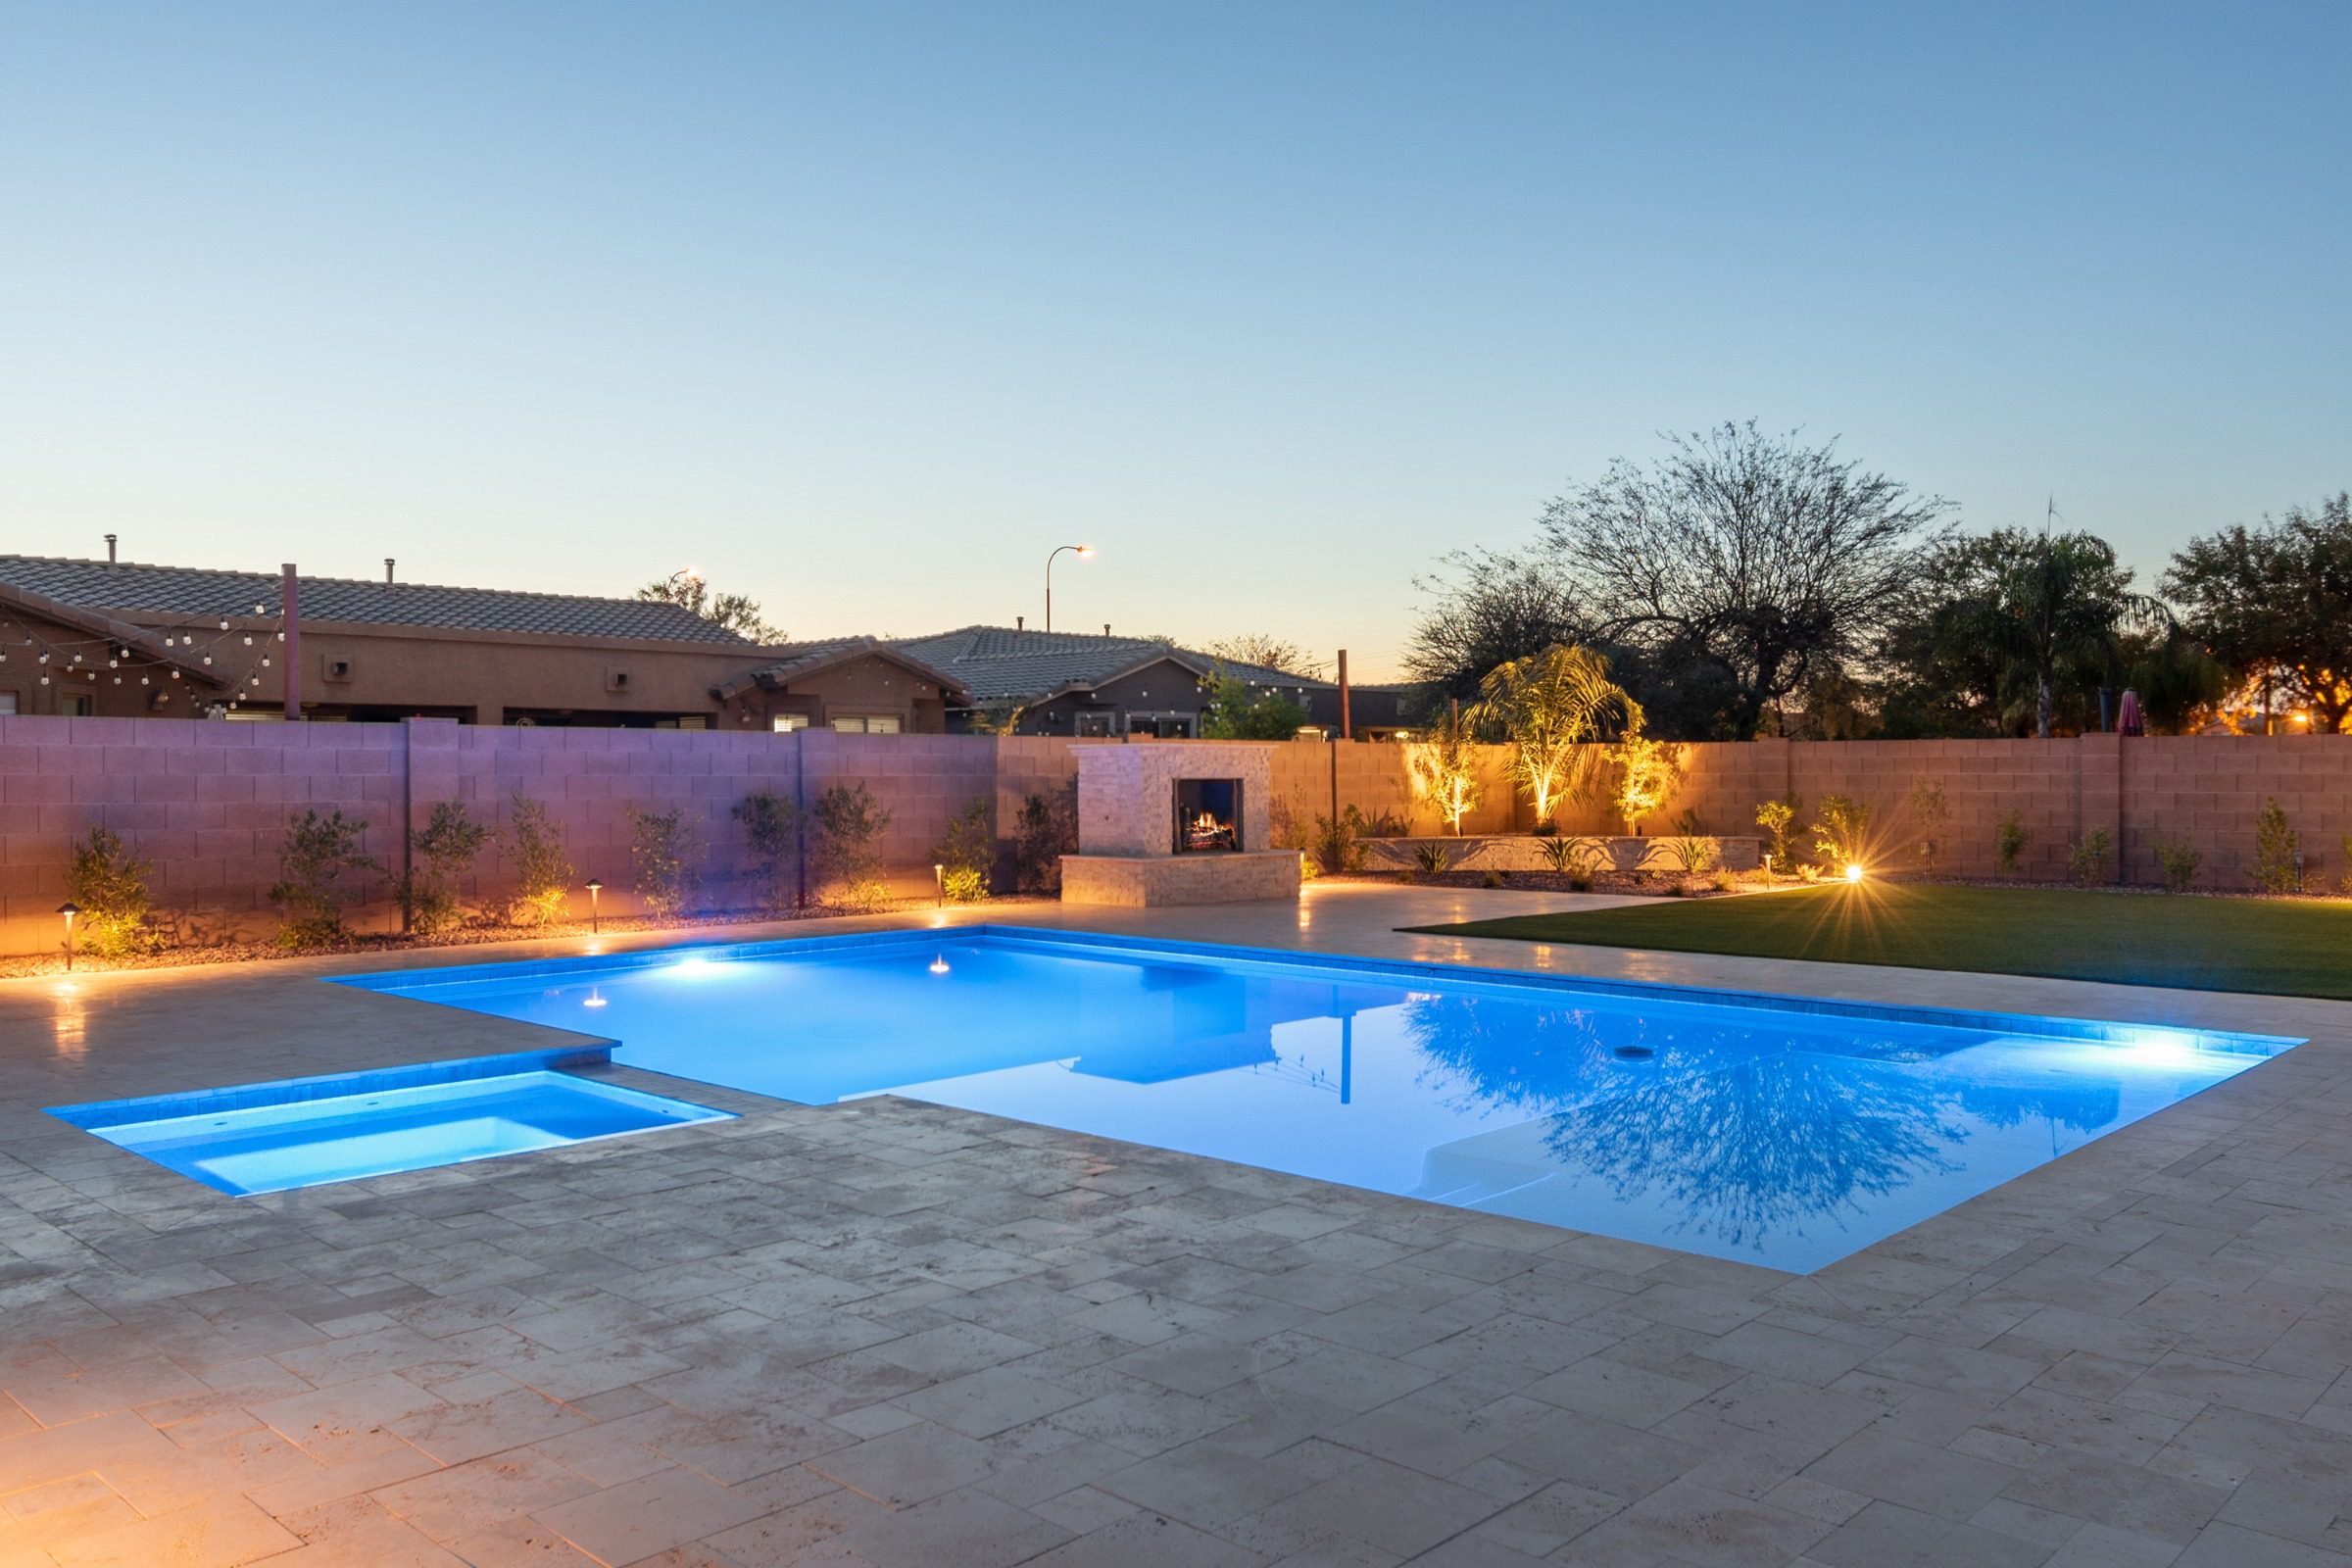 Pool with Spectrum Nicheless Pool Lights